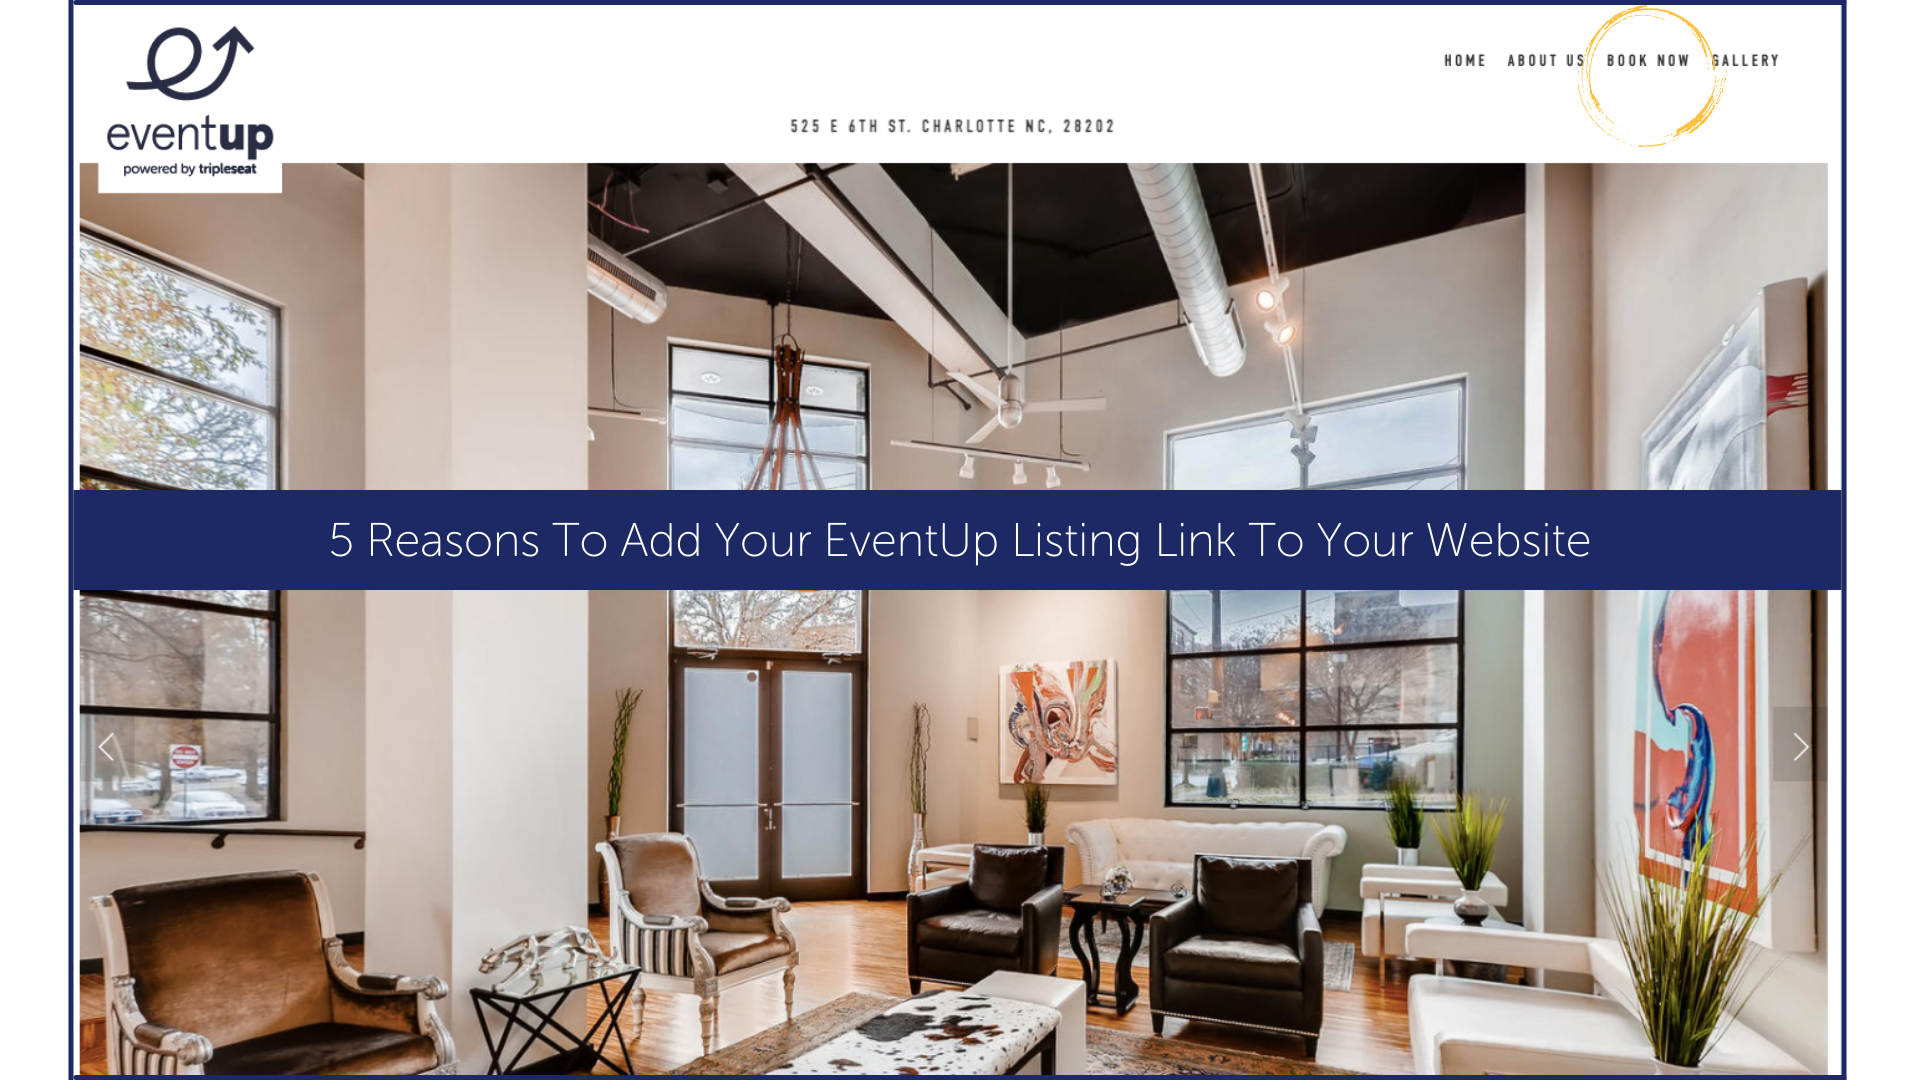 5 Reasons To Add Your EventUp Listing Link To Your Website